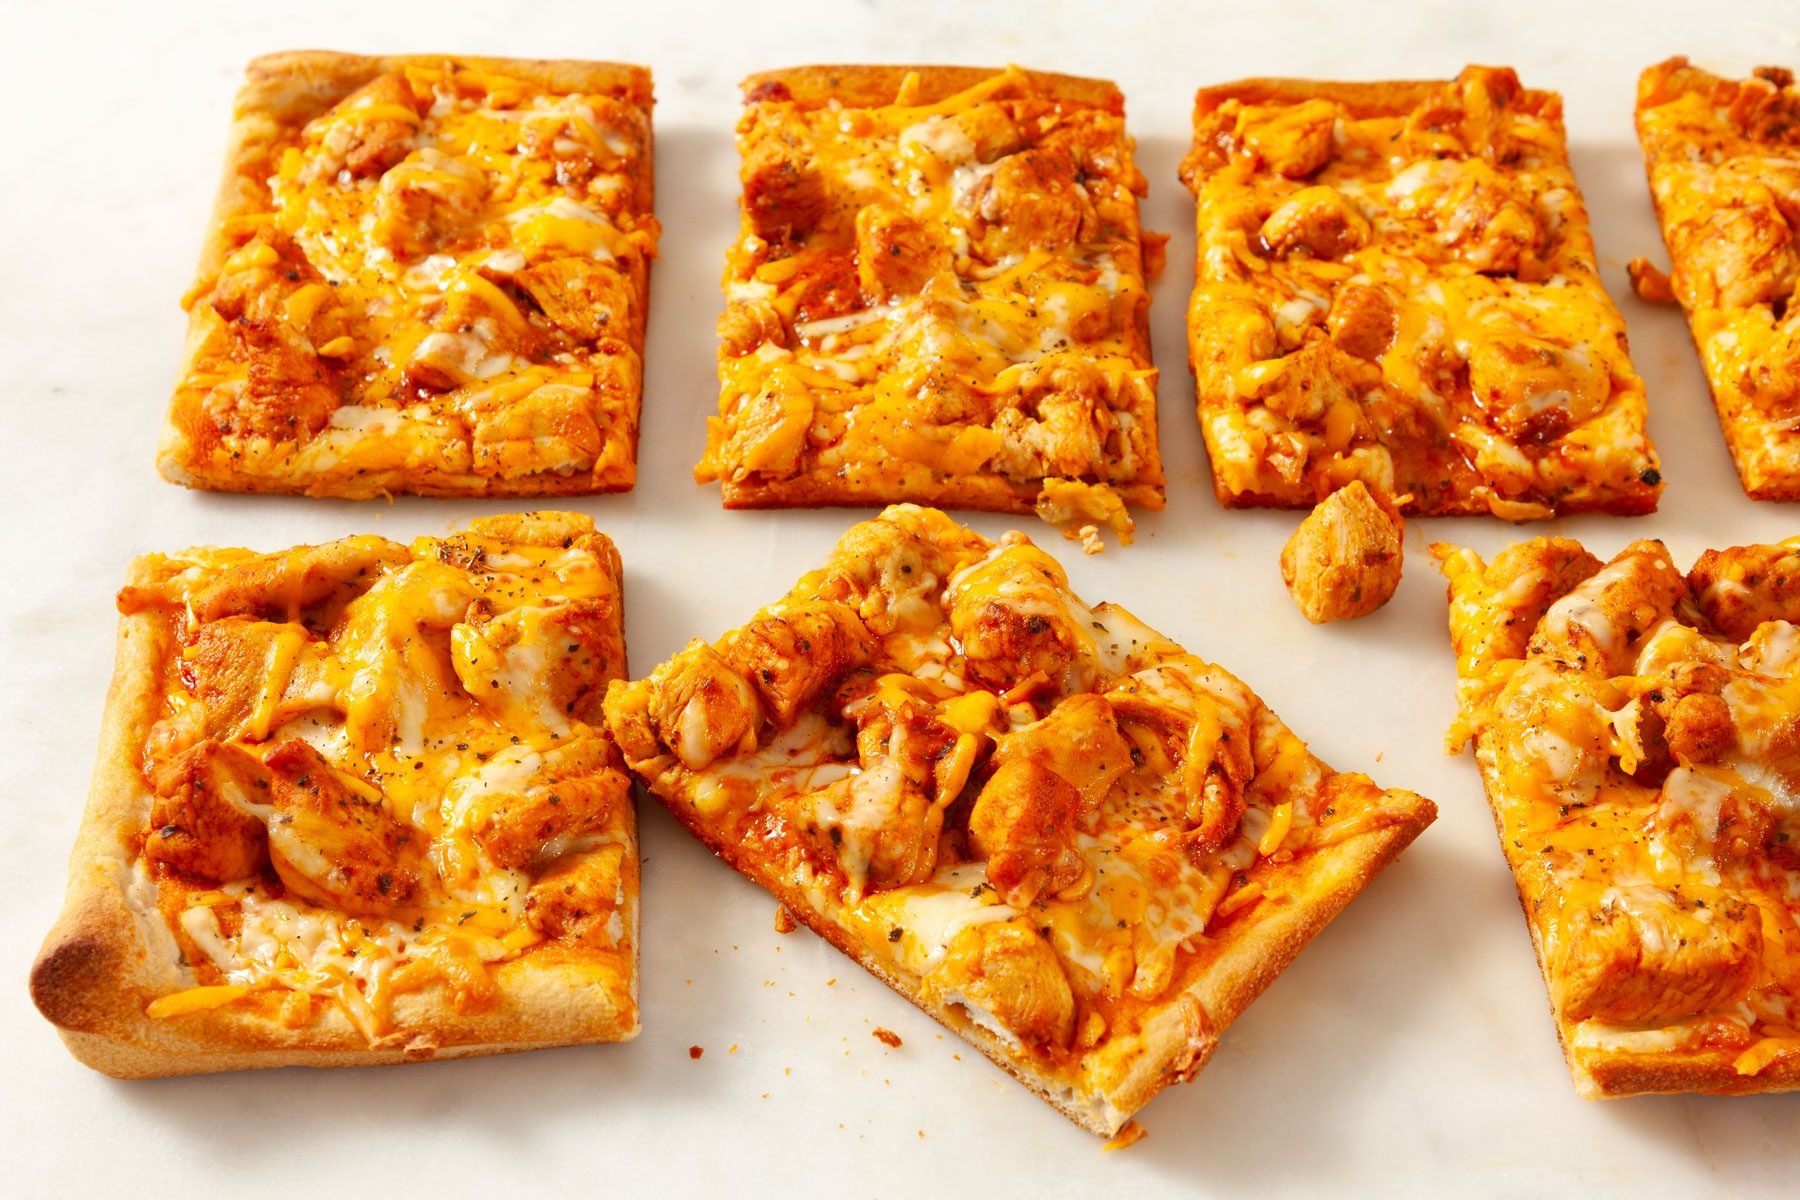 Slices of Buffalo Chicken Pizza on a white surface